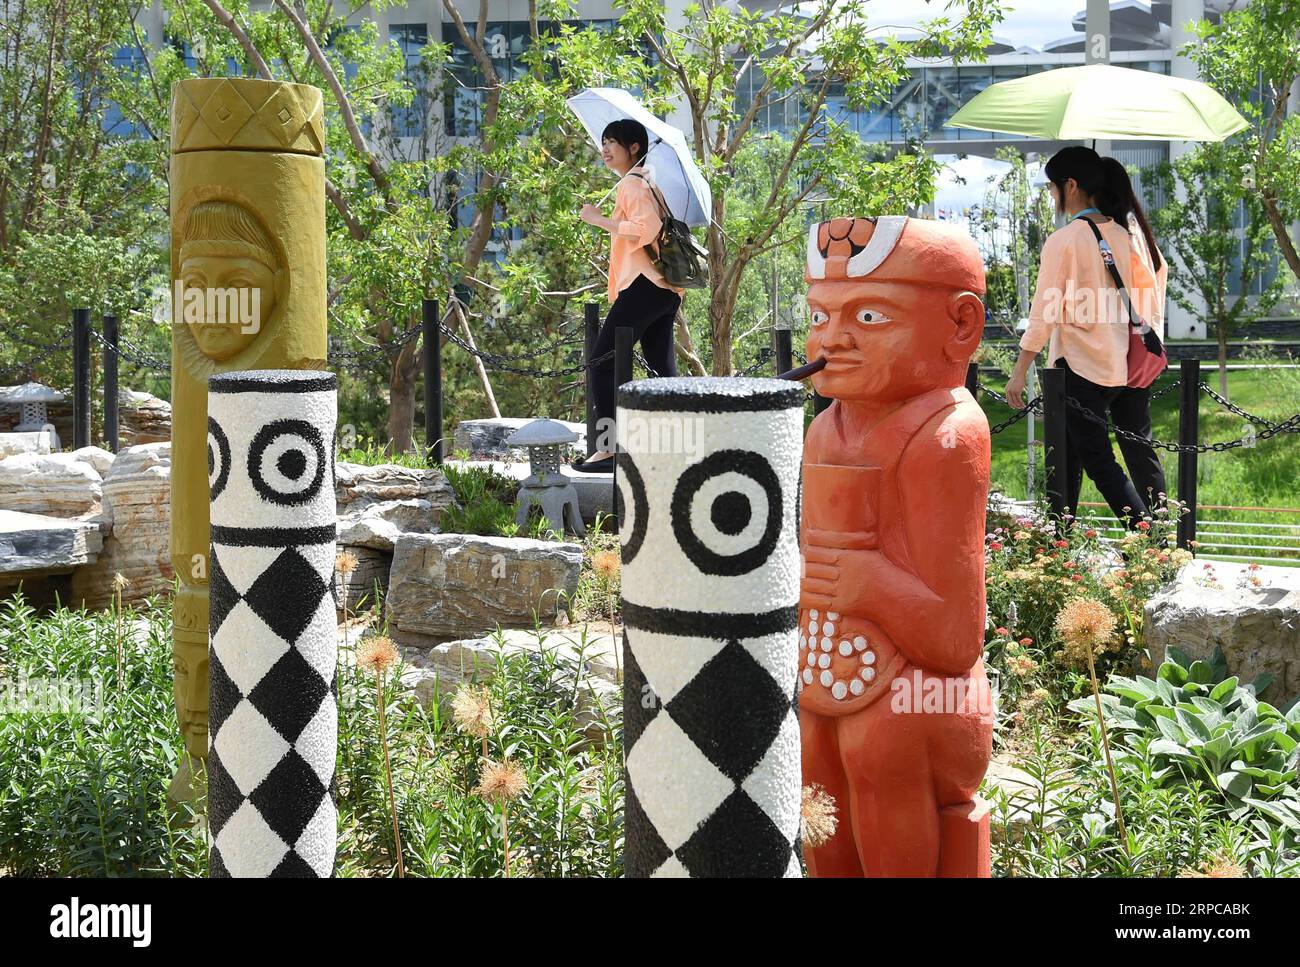 (190629) -- BEIJING, June 29, 2019 -- Tourists visit the Taiwan Garden during the Taiwan Day event at the Beijing International Horticultural Exhibition in Yanqing District of Beijing, capital of China, June 29, 2019. The ongoing Beijing International Horticultural Exhibition ushered in Taiwan Day event on Saturday. ) CHINA-BEIJING-HORTICULTURAL EXPO-TAIWAN (CN) RenxChao PUBLICATIONxNOTxINxCHN Stock Photo